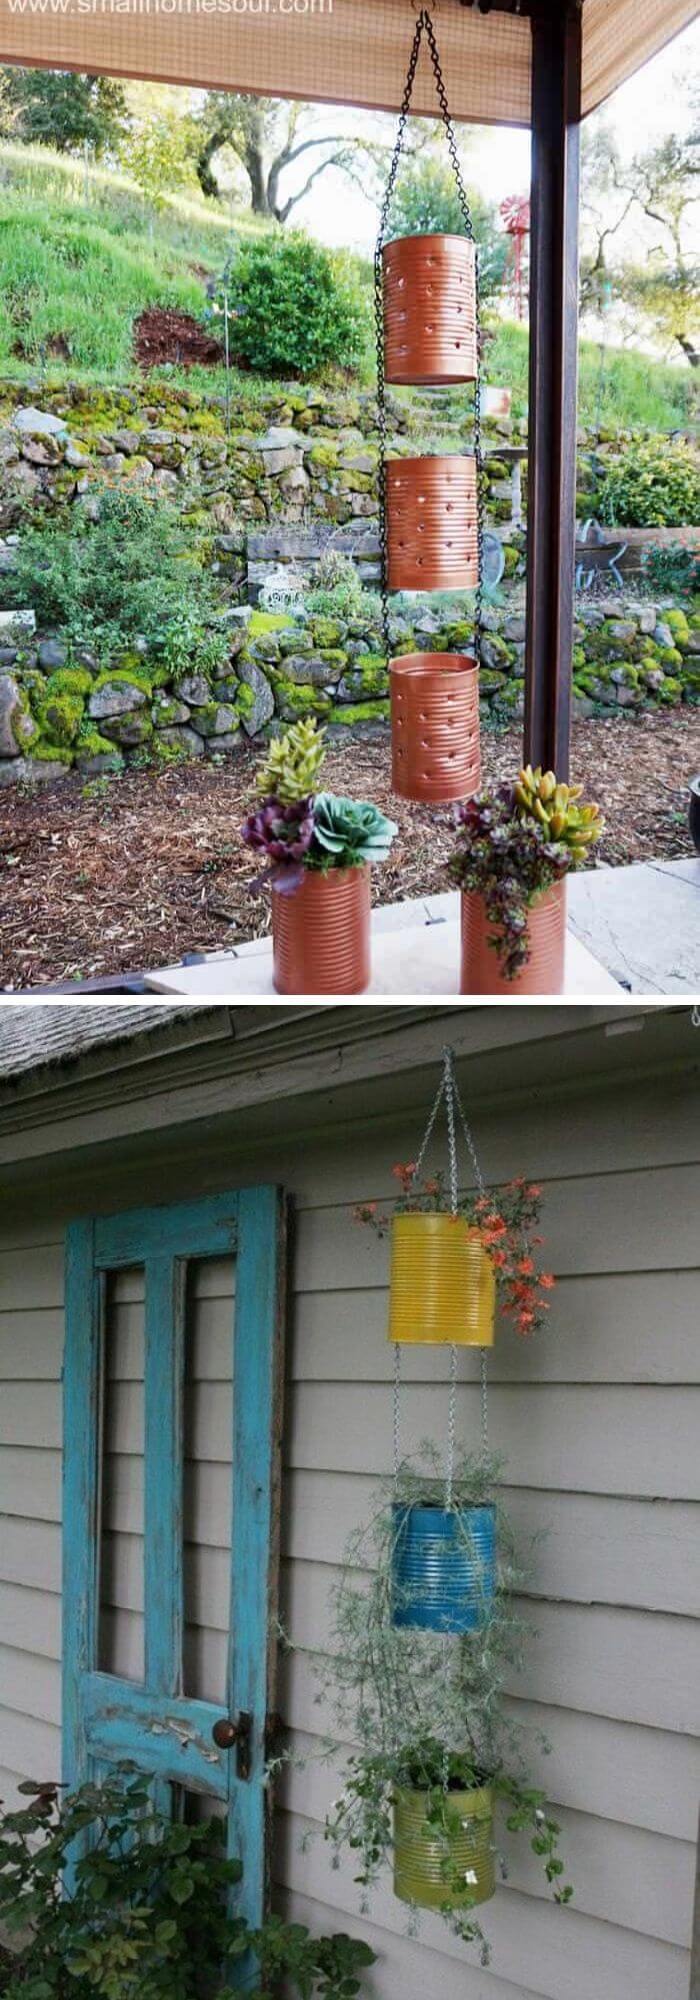 Recycled Tin Can Lantern and Hanging Planter